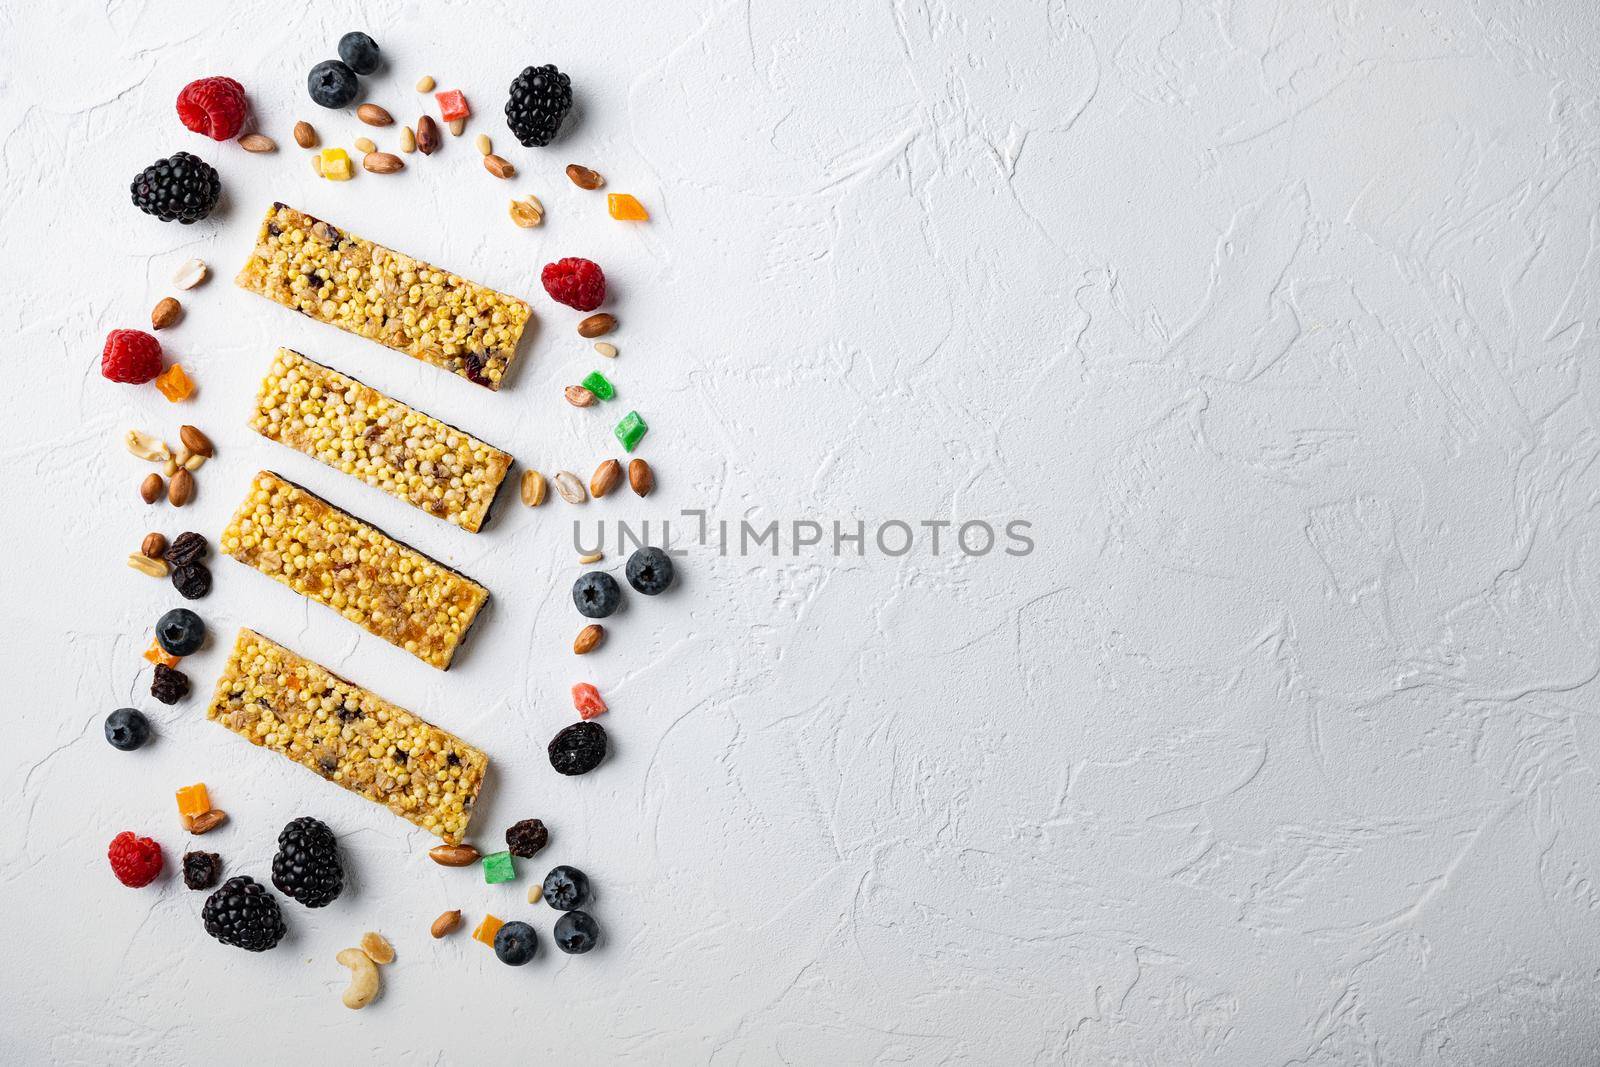 Healthy snacks, fitness lifestyle and high fiber diet concept, top view with copy space, on white background by Ilianesolenyi